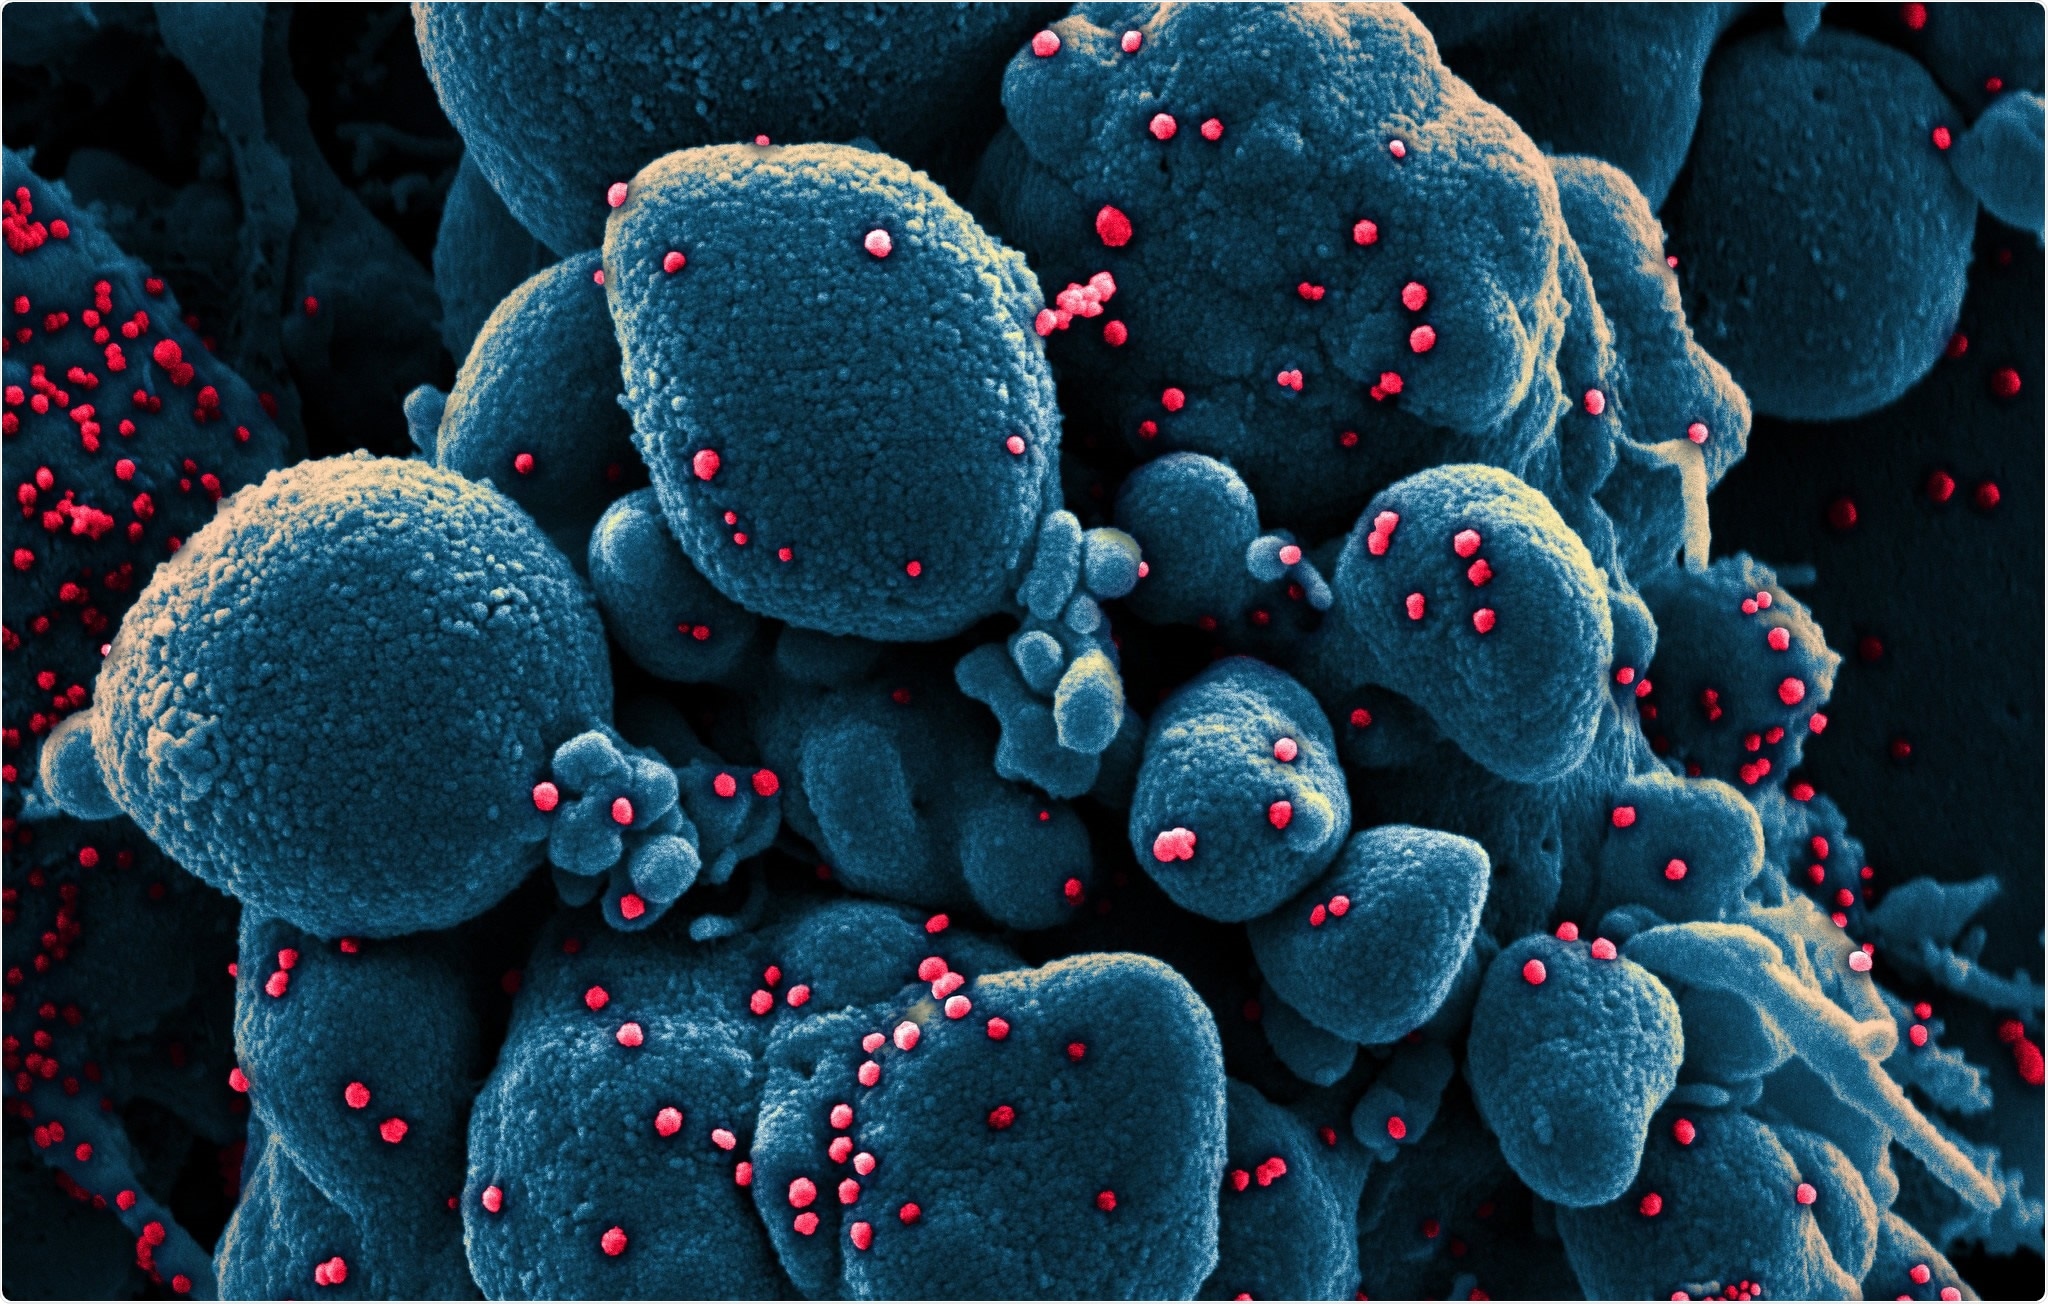 Colorized scanning electron micrograph of an apoptotic cell (blue) infected with SARS-COV-2 virus particles (red), isolated from a patient sample. Image captured at the NIAID Integrated Research Facility (IRF) in Fort Detrick, Maryland. Credit: NIAID